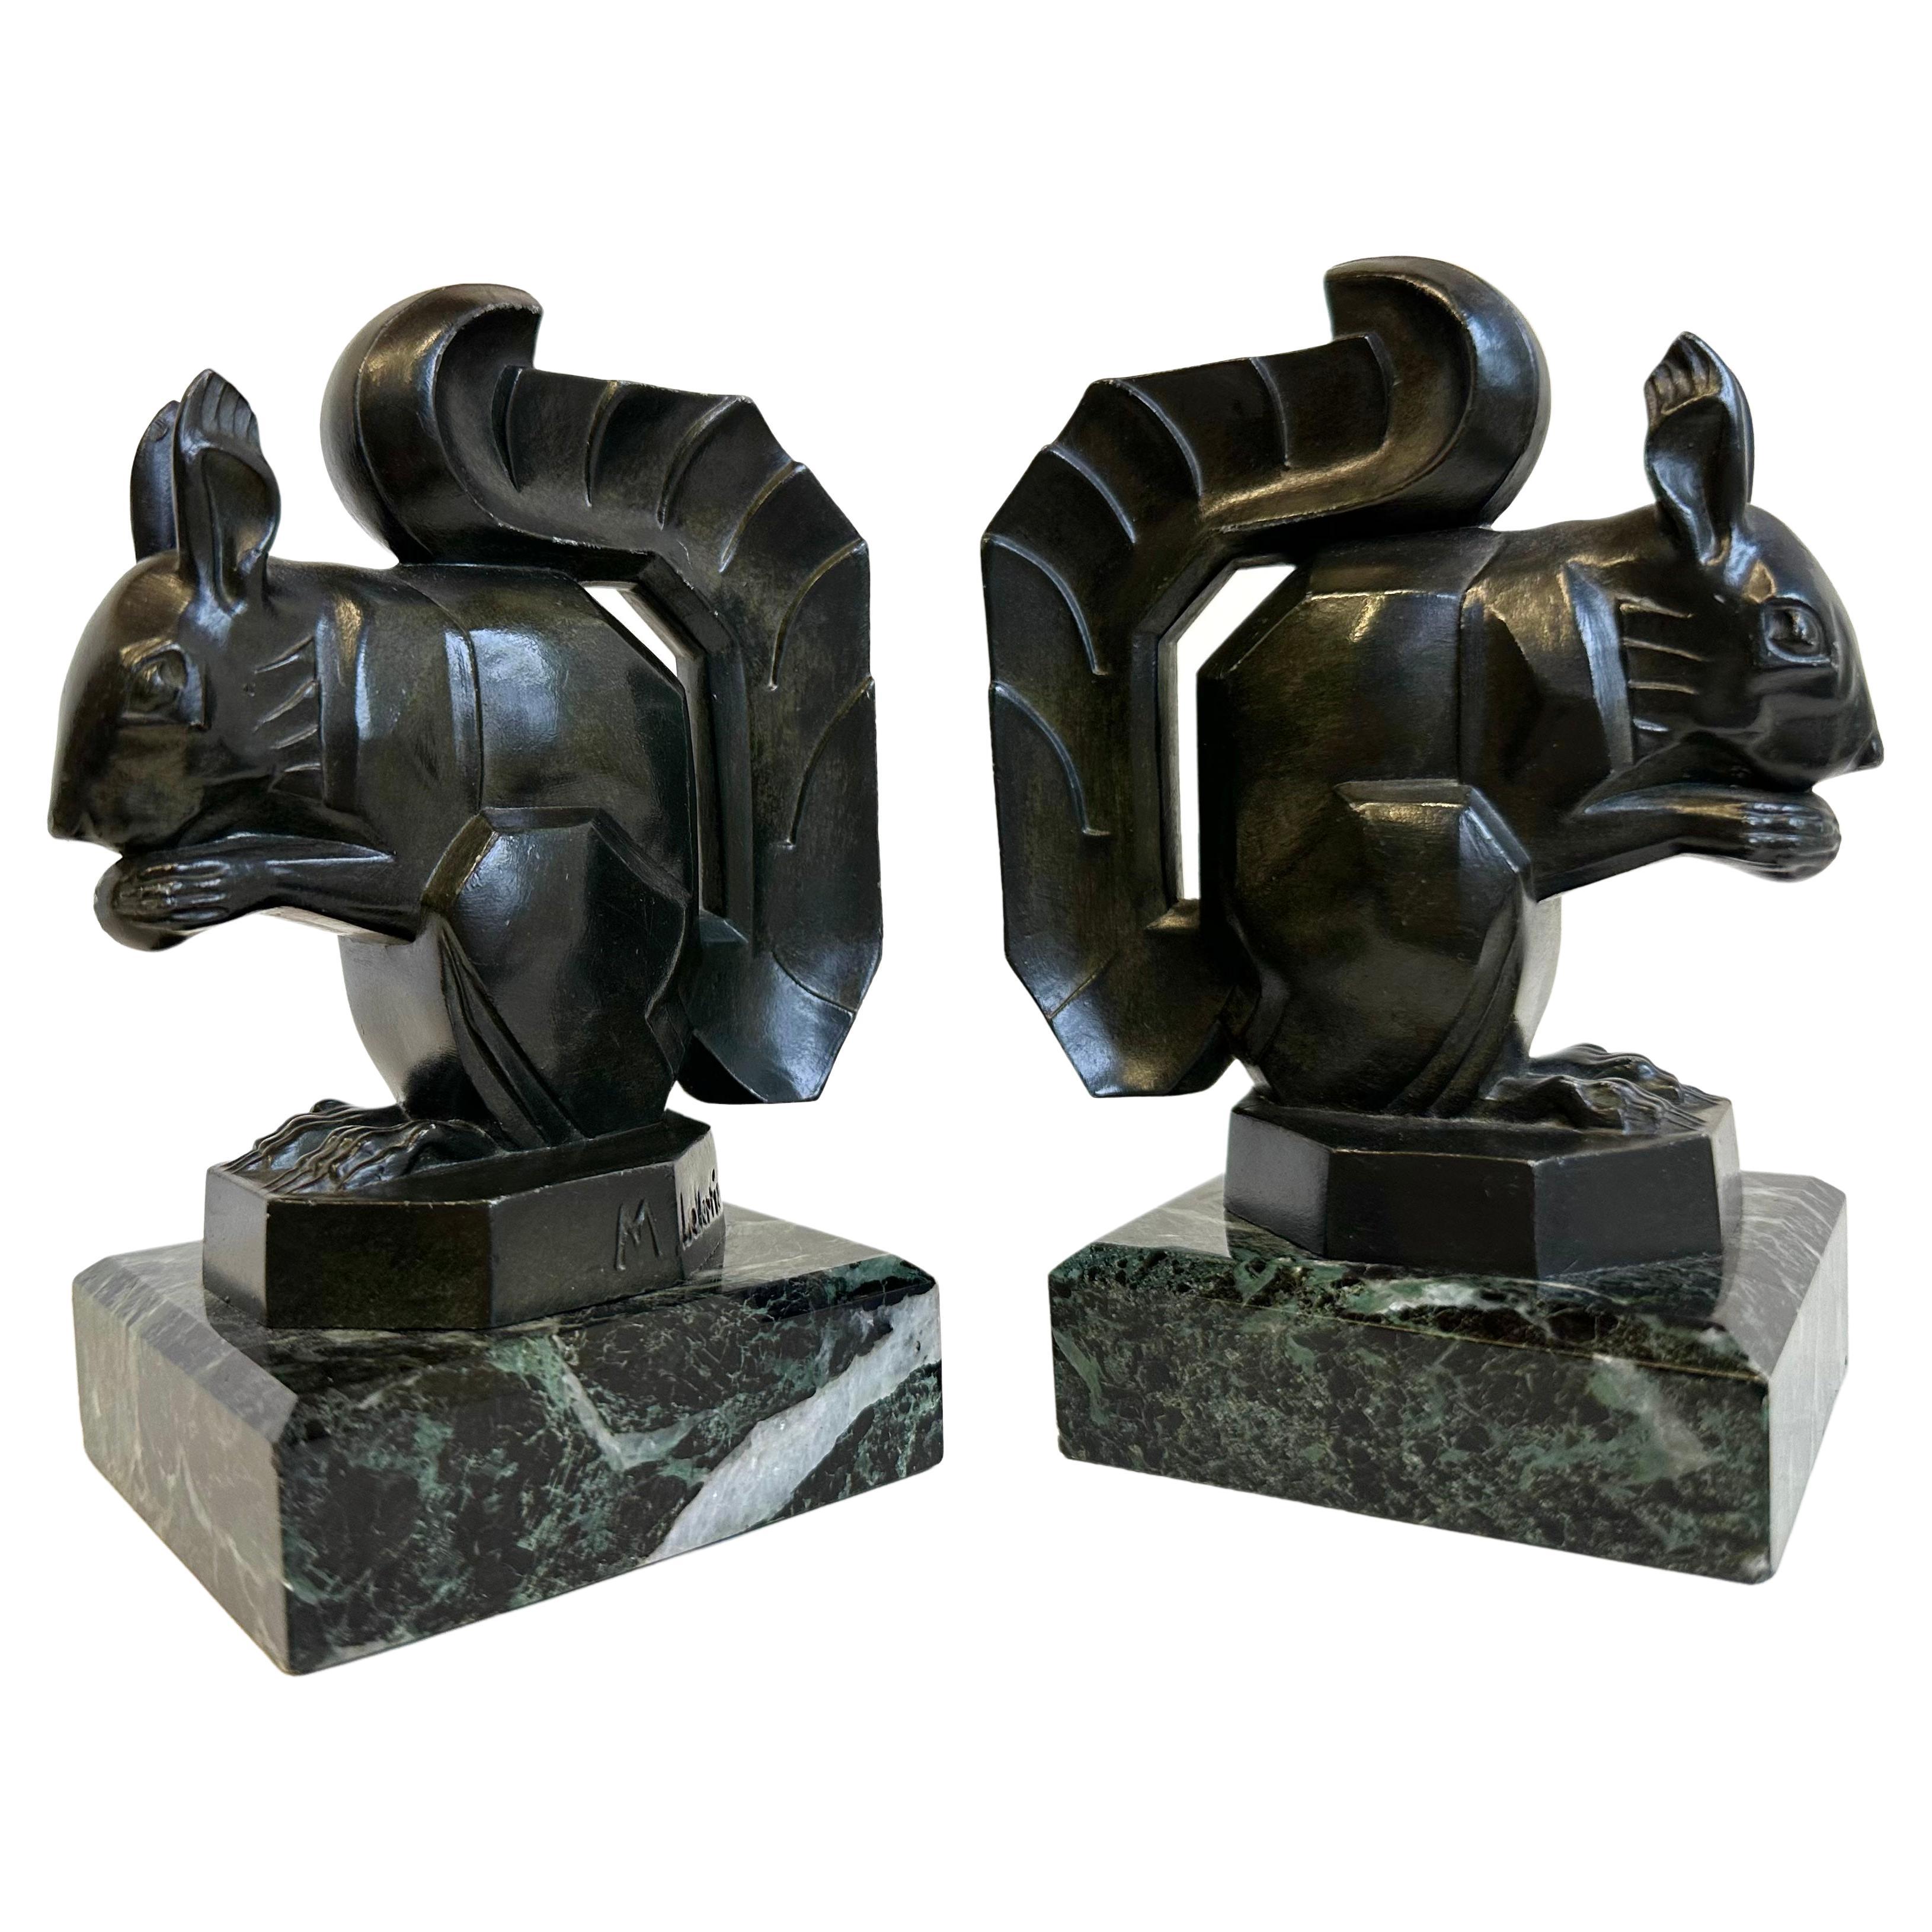 Antique Art Deco ''Squirrel'' Bookends by Max Le Verrier 1930 France Marble